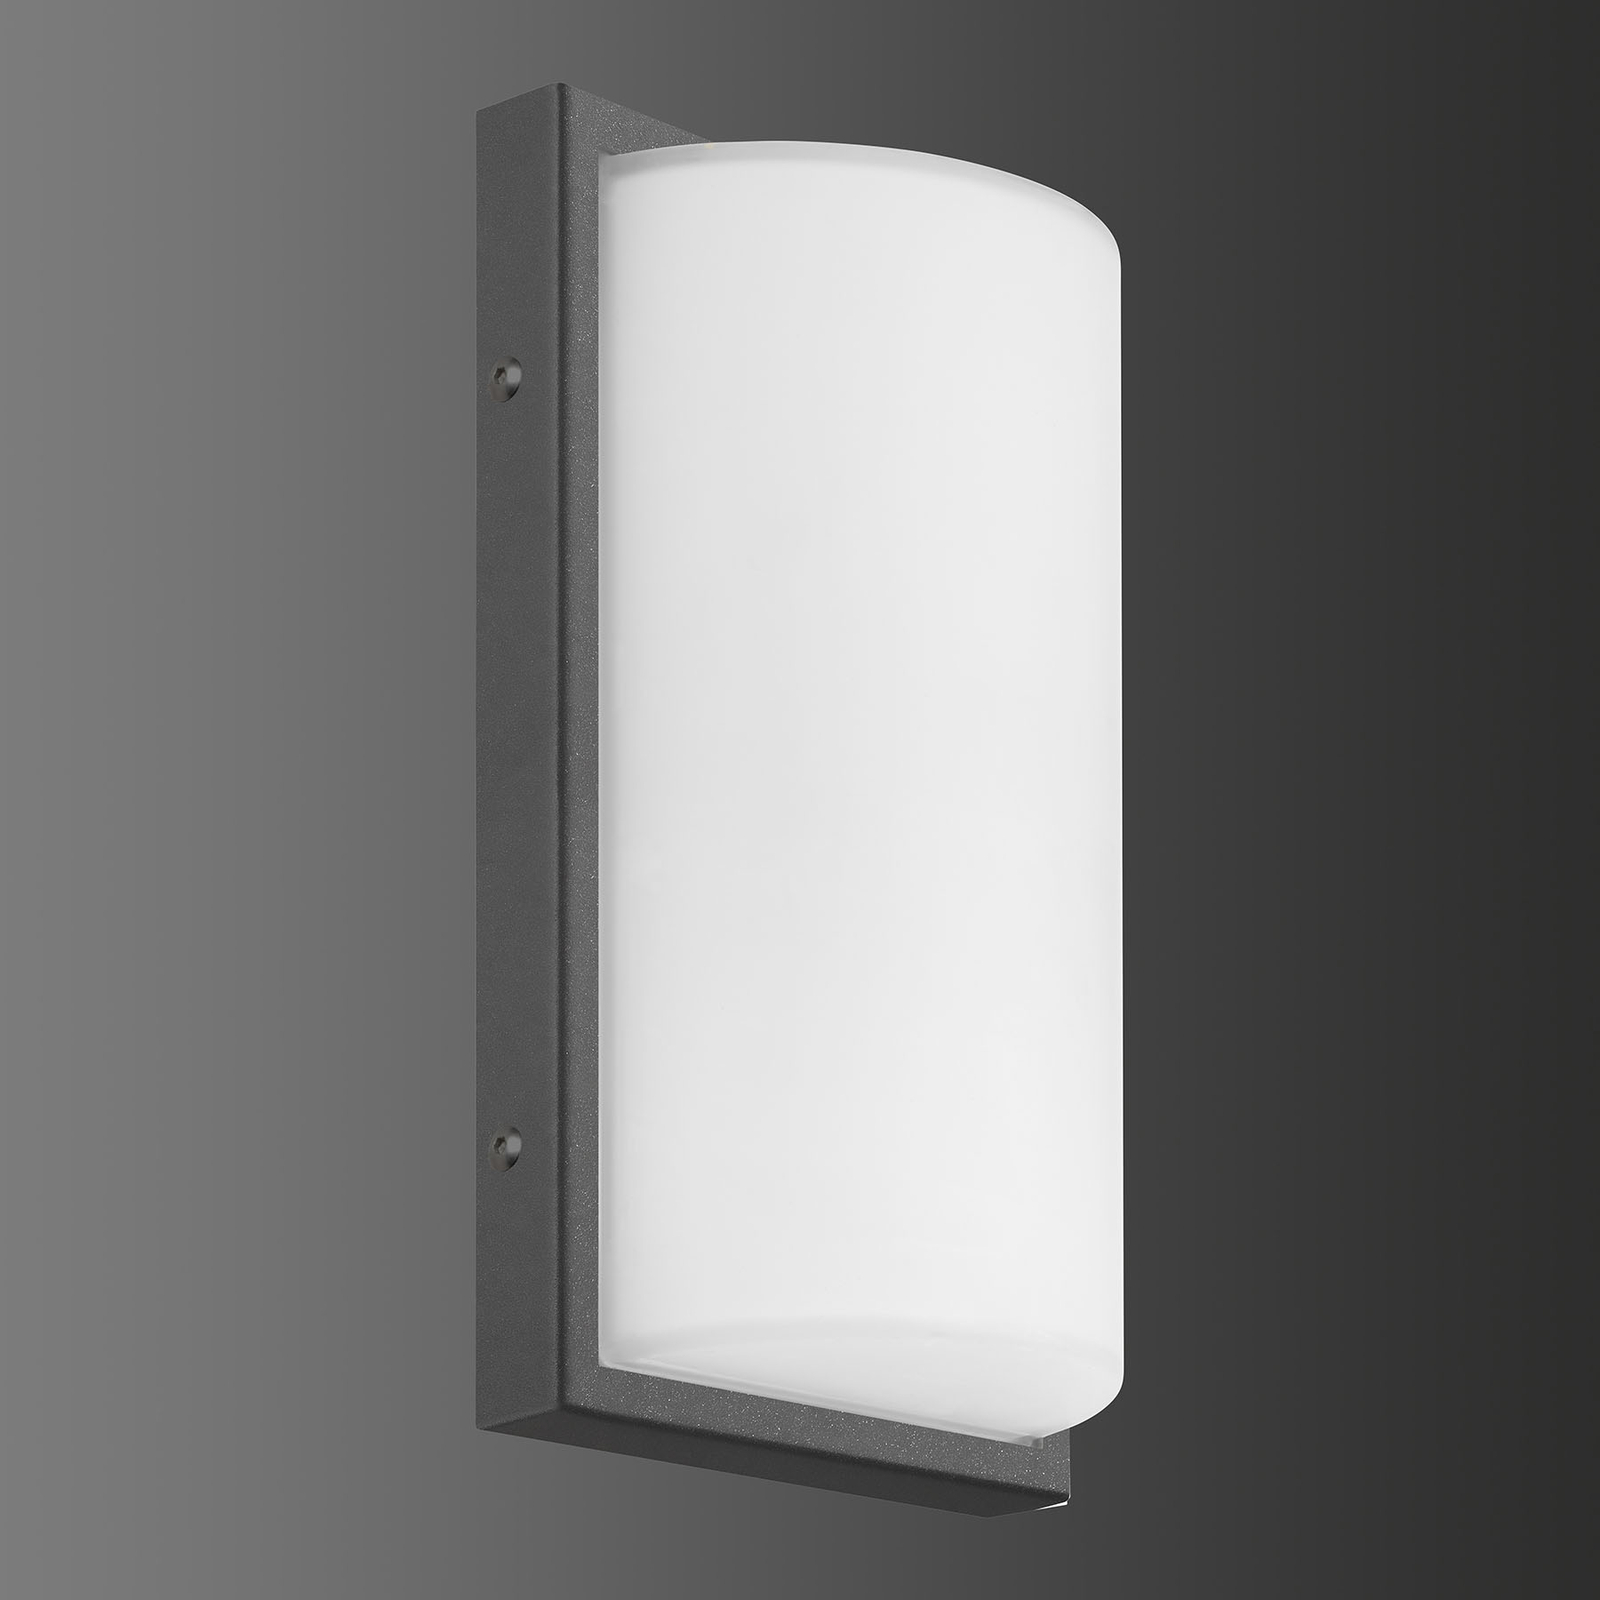 039 LED outdoor wall lamp motion detector graphite